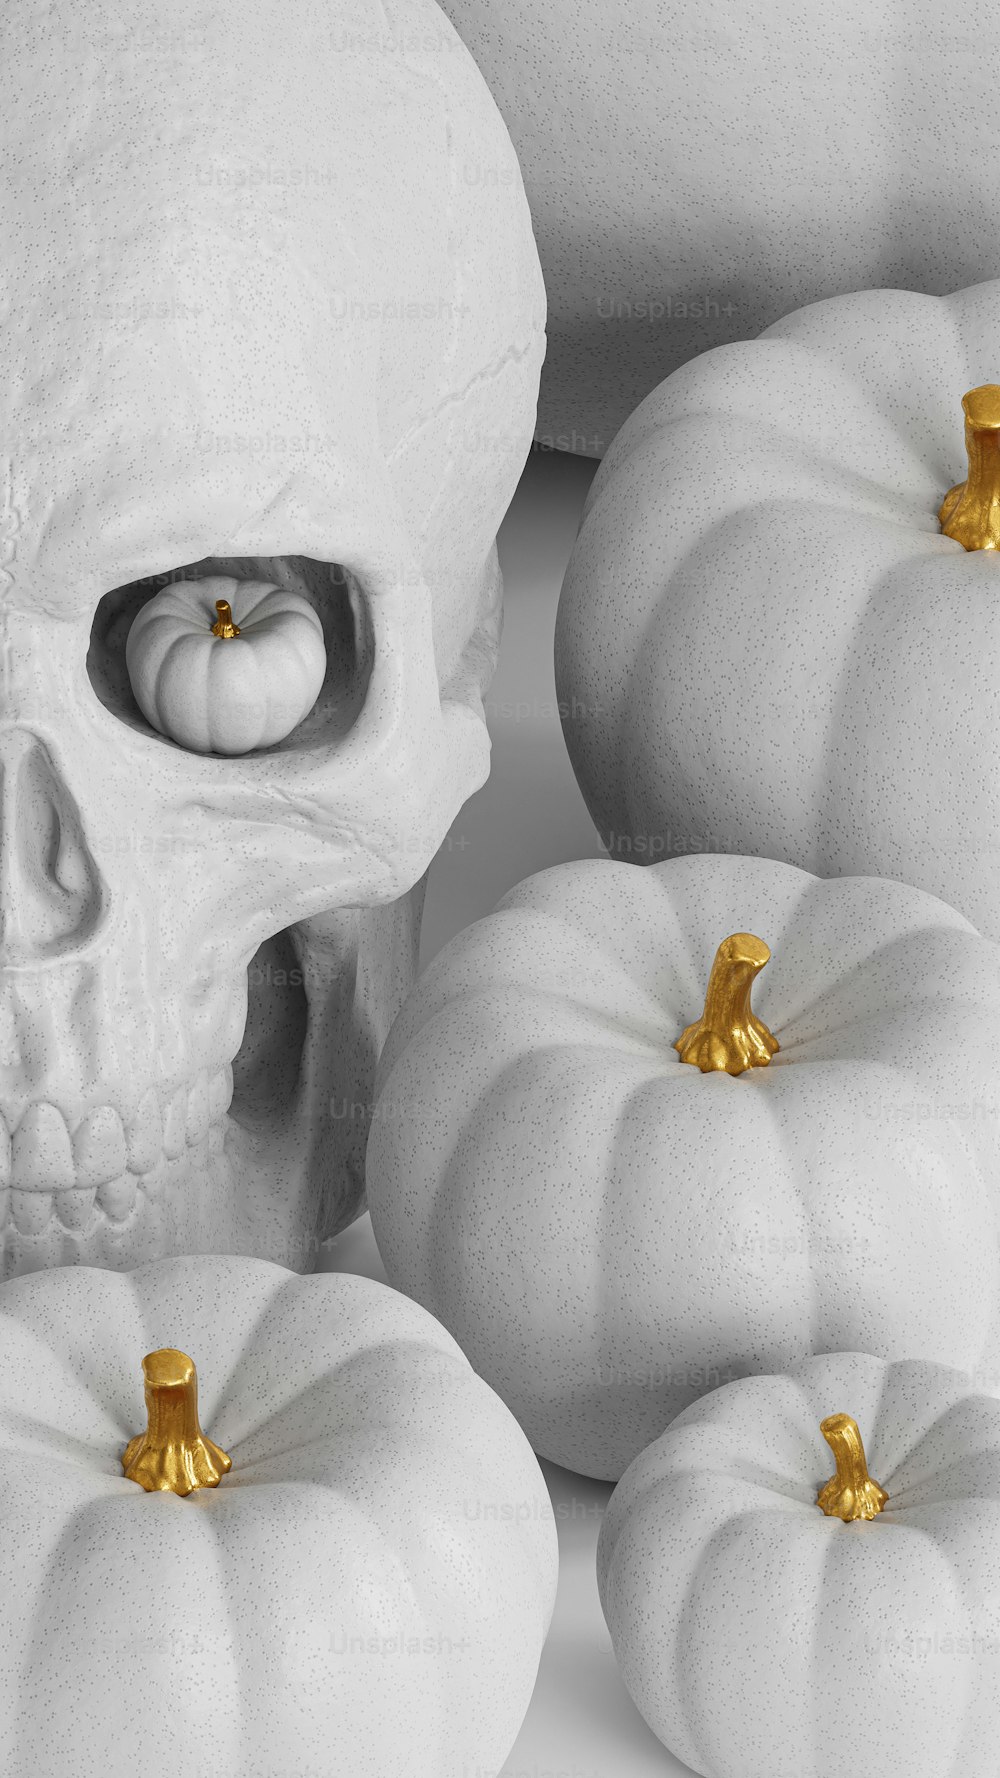 a group of white pumpkins with a skull in the middle